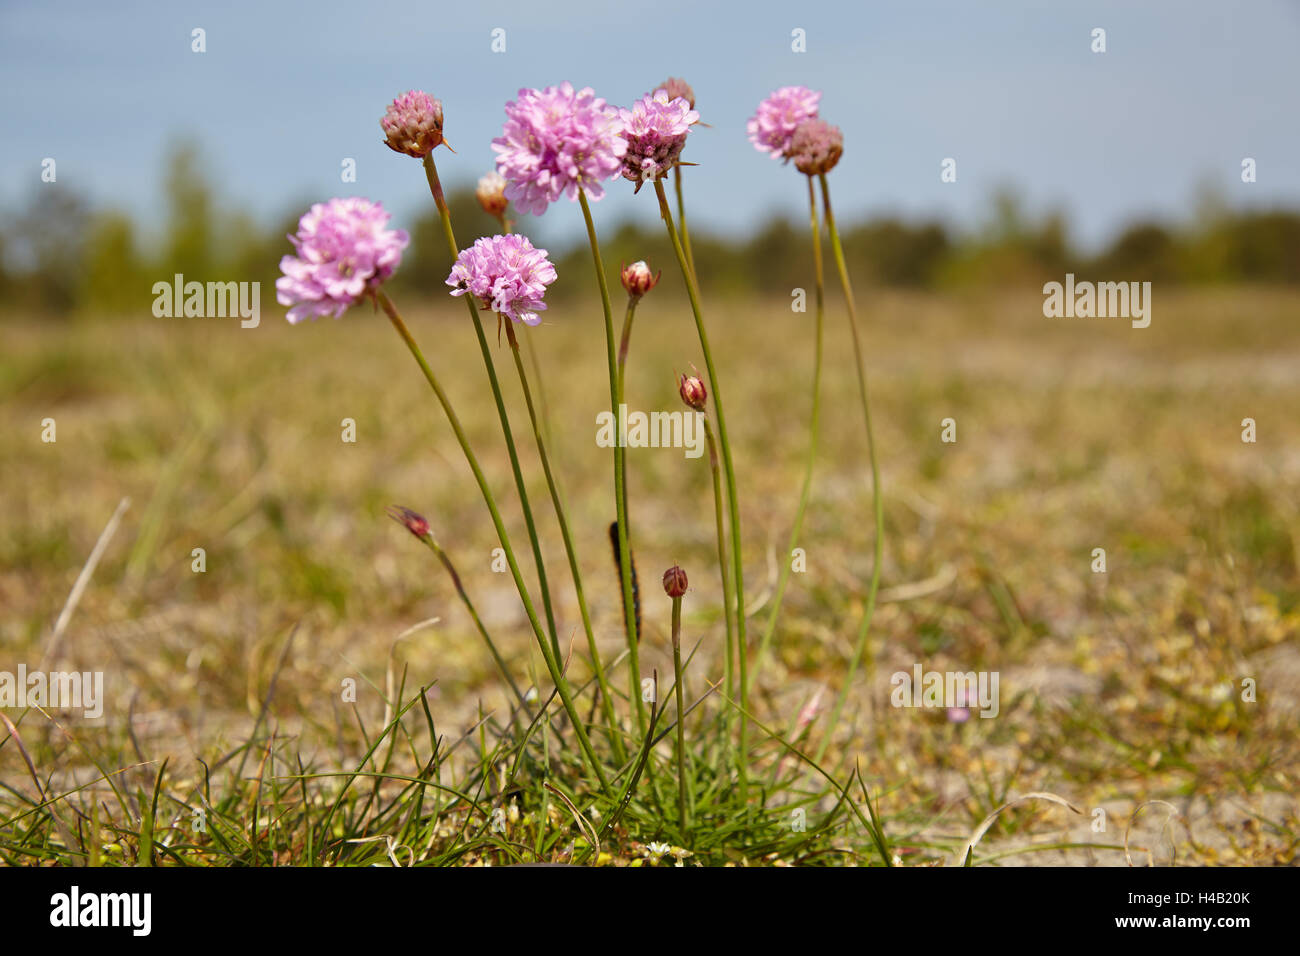 Thrift, Armeria maritima, also known as sea thrift, on the salt meadows of the island Hiddensee Stock Photo